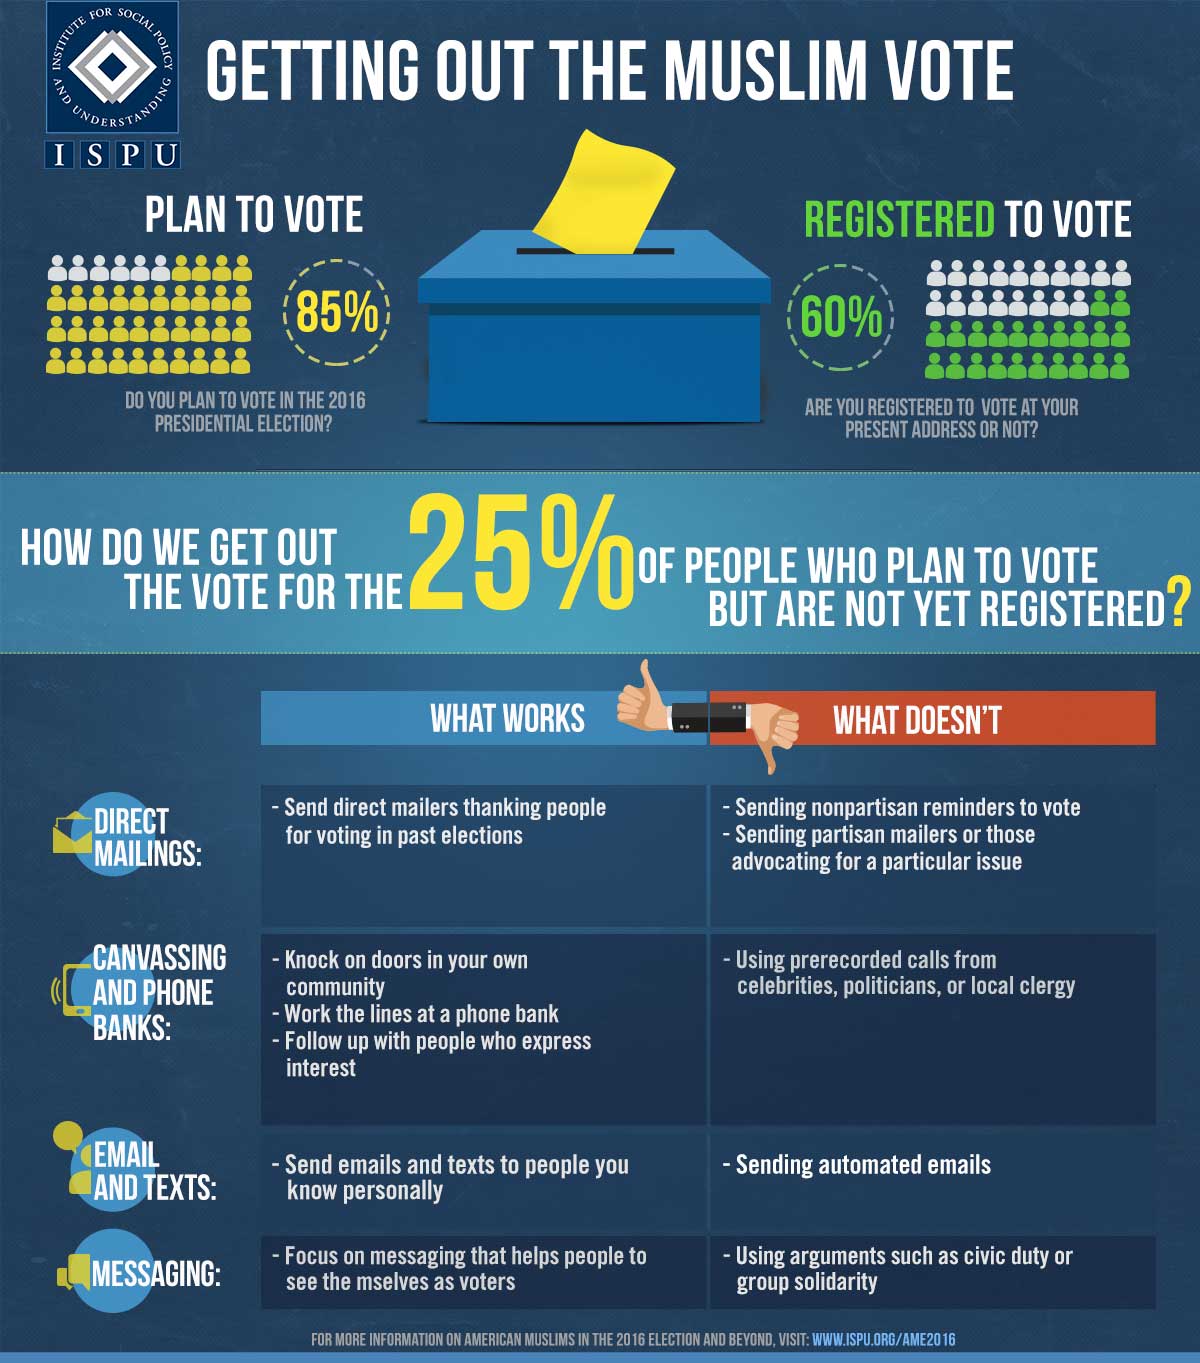 An infographic showing how to get out the Muslim vote. 85% of Muslim plan to vote, but only 60% are registered. How do we get out the vote for the 25% of people who plan to vote but are not yet registered? What works: direct mailers thanking people for voting in past elections, knocking on doors in your community, following up with people, sending emails and texts to people you know personally, focusing on messaging that helps people to see themselves as voters. What doesn't work: sending nonpartisan reminders to vote and sending partisan mailers, using prerecorded calls, sending automated emails, using arguments such as civic duty or group solidarity.